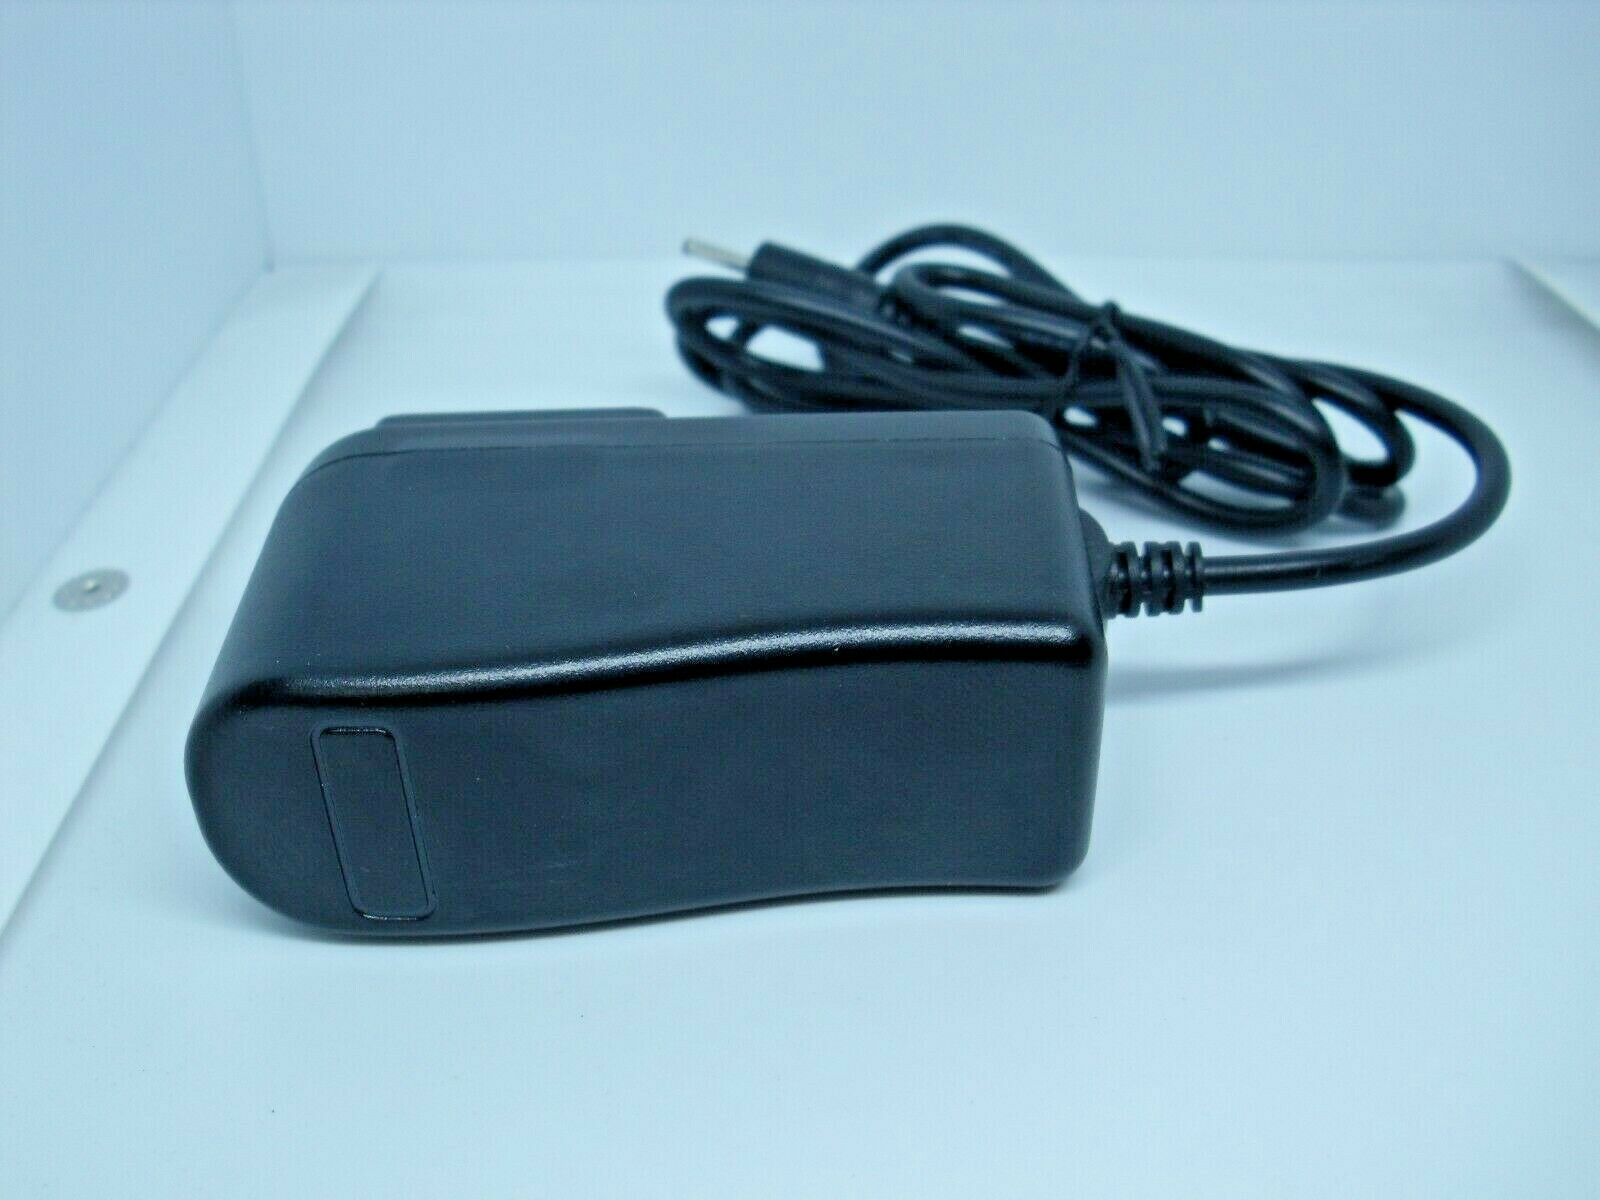 AC DC Power Supply Adapter THX-050200KE Output 5v 2A Thin Plug USA SELLER Type: Adapter Features: new Cable Length: